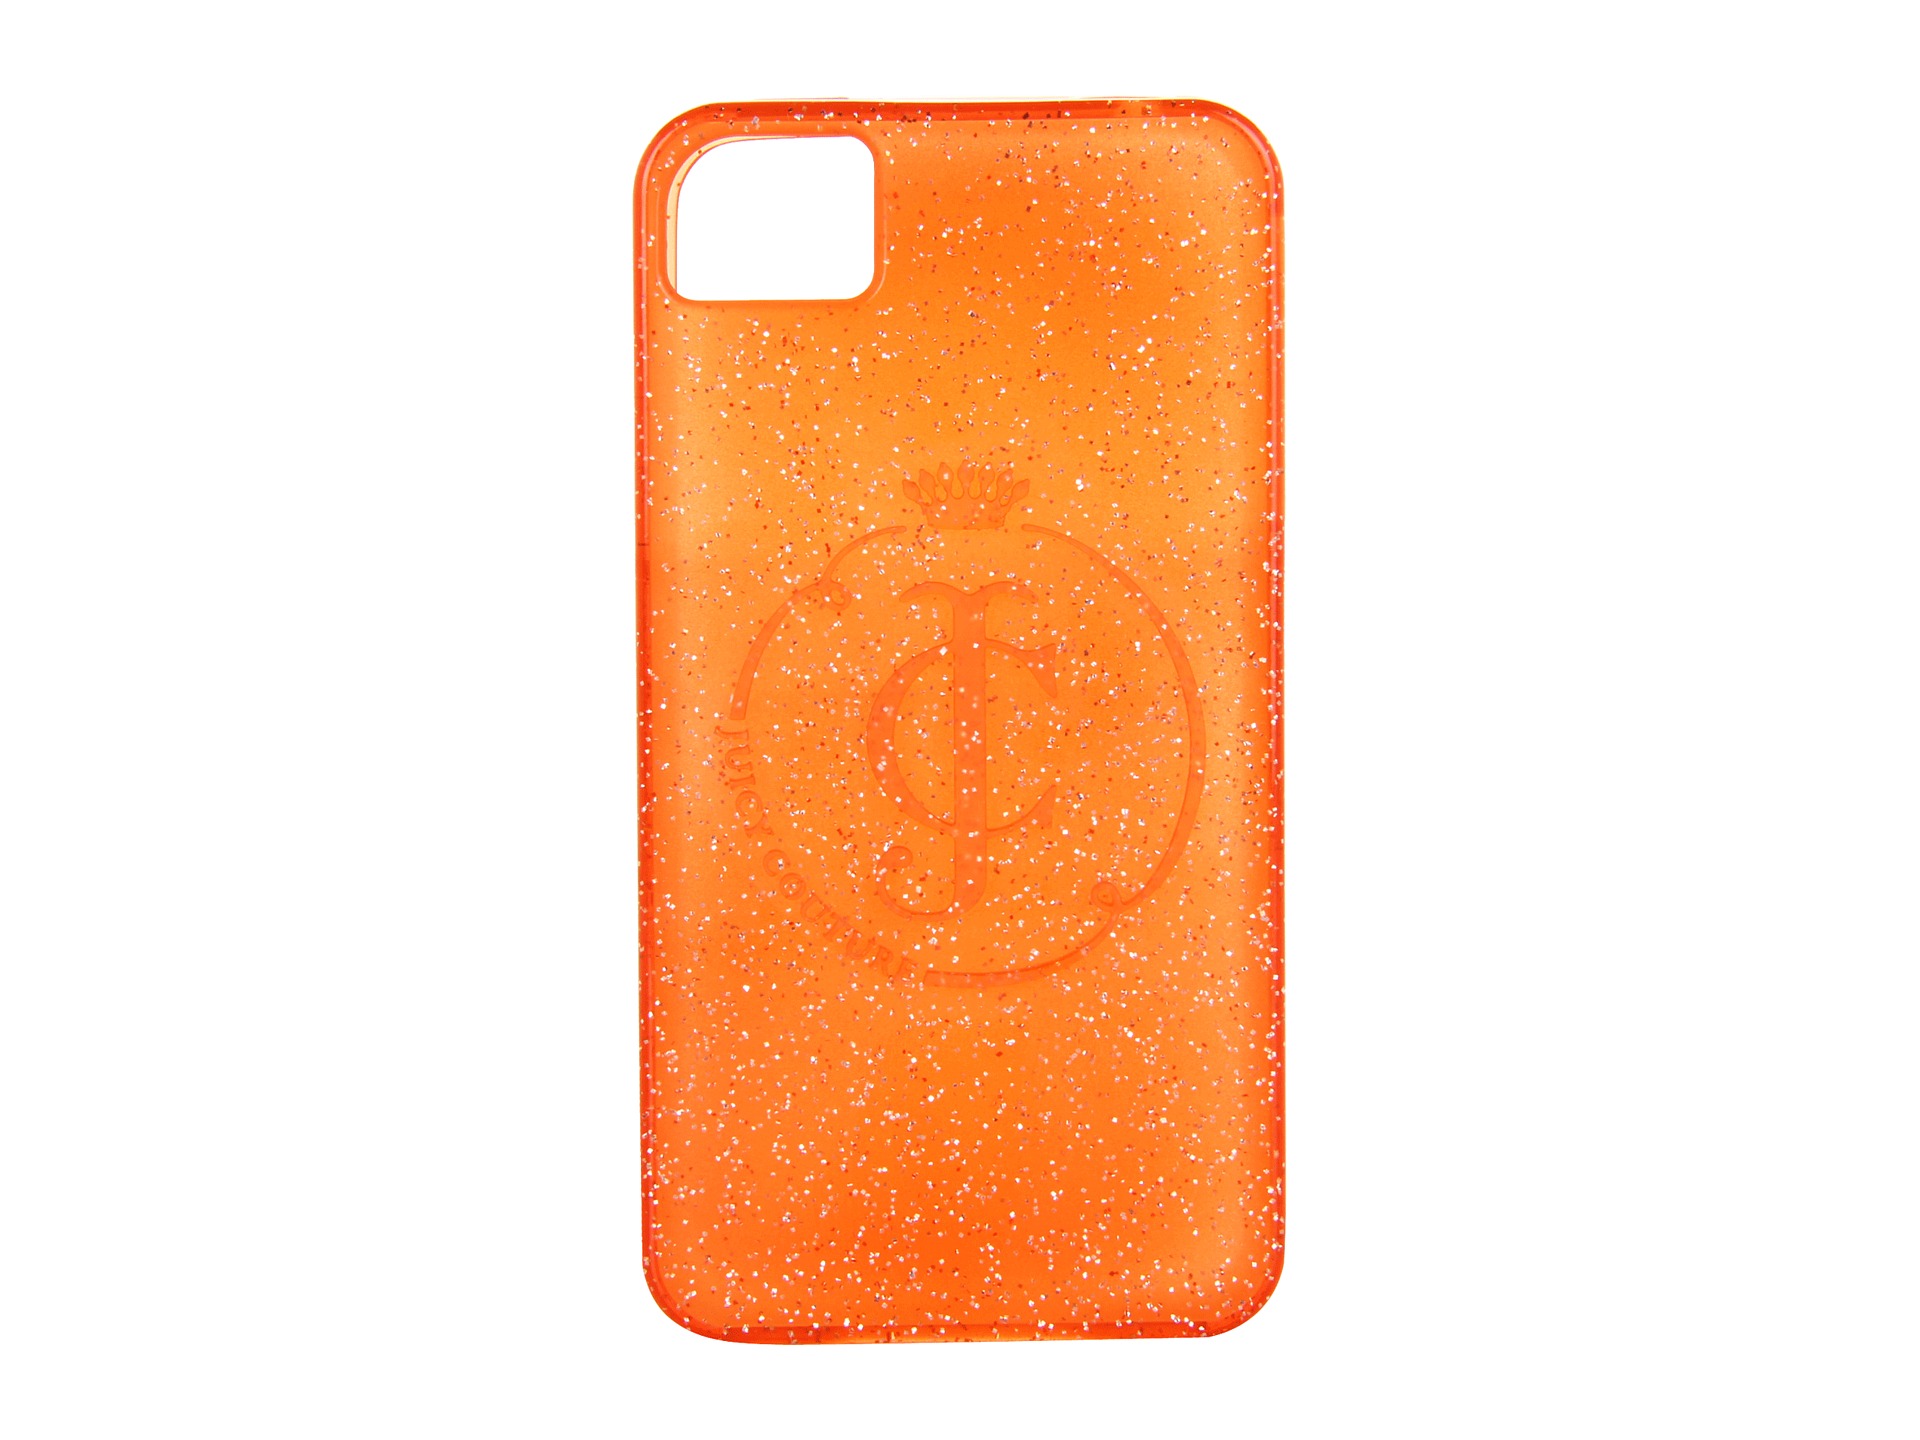 Juicy Couture Glitter Gelli iPhone Case $28.00 NEW Juicy Couture 